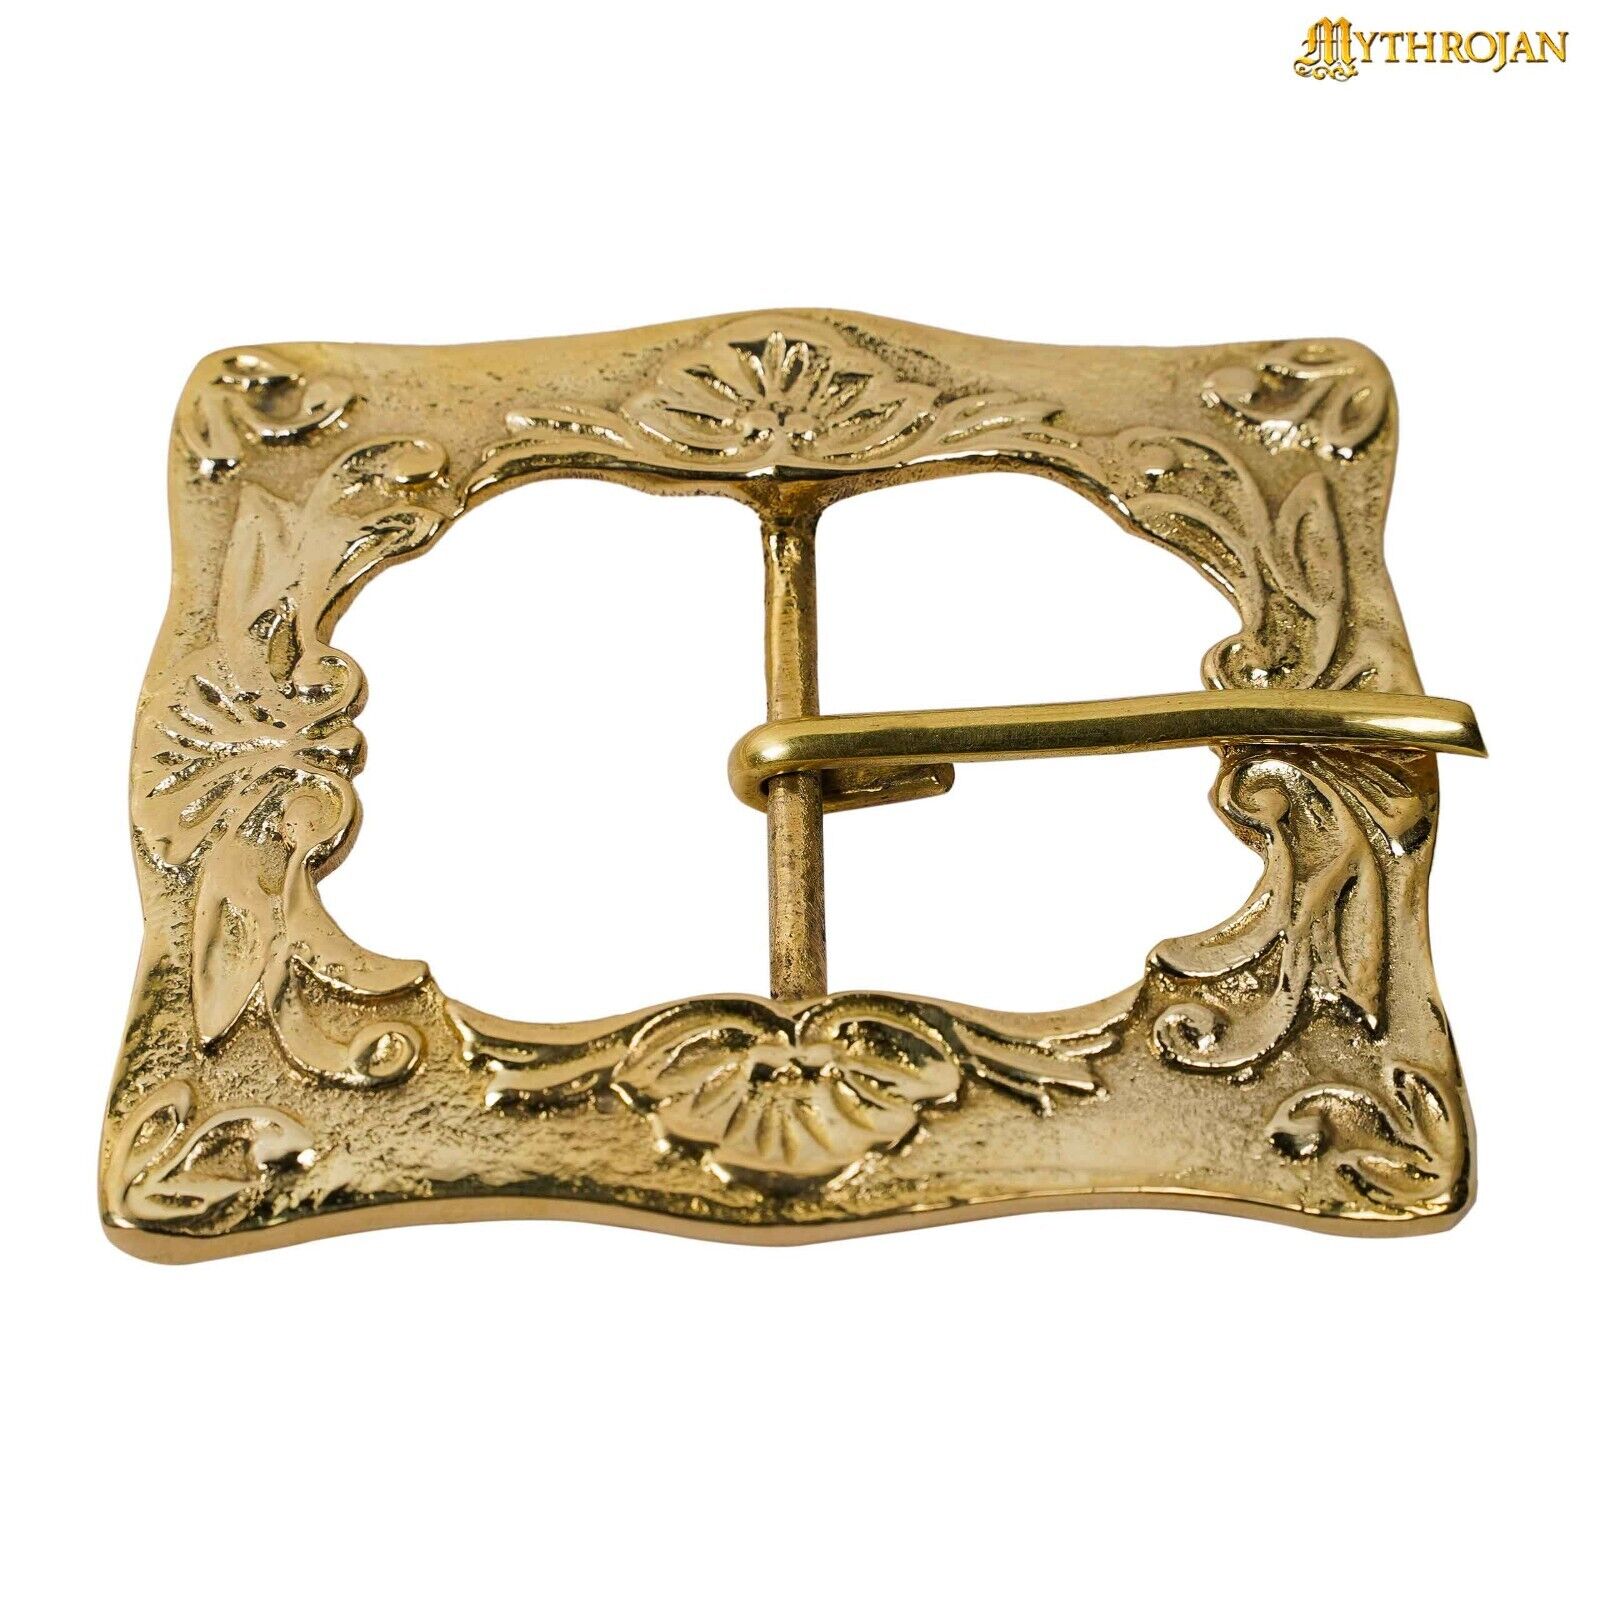 Solid Brass Pirate Belt Buckle: Ideal for LARP DIY Costume Cosplay 3.3x2.7 inch